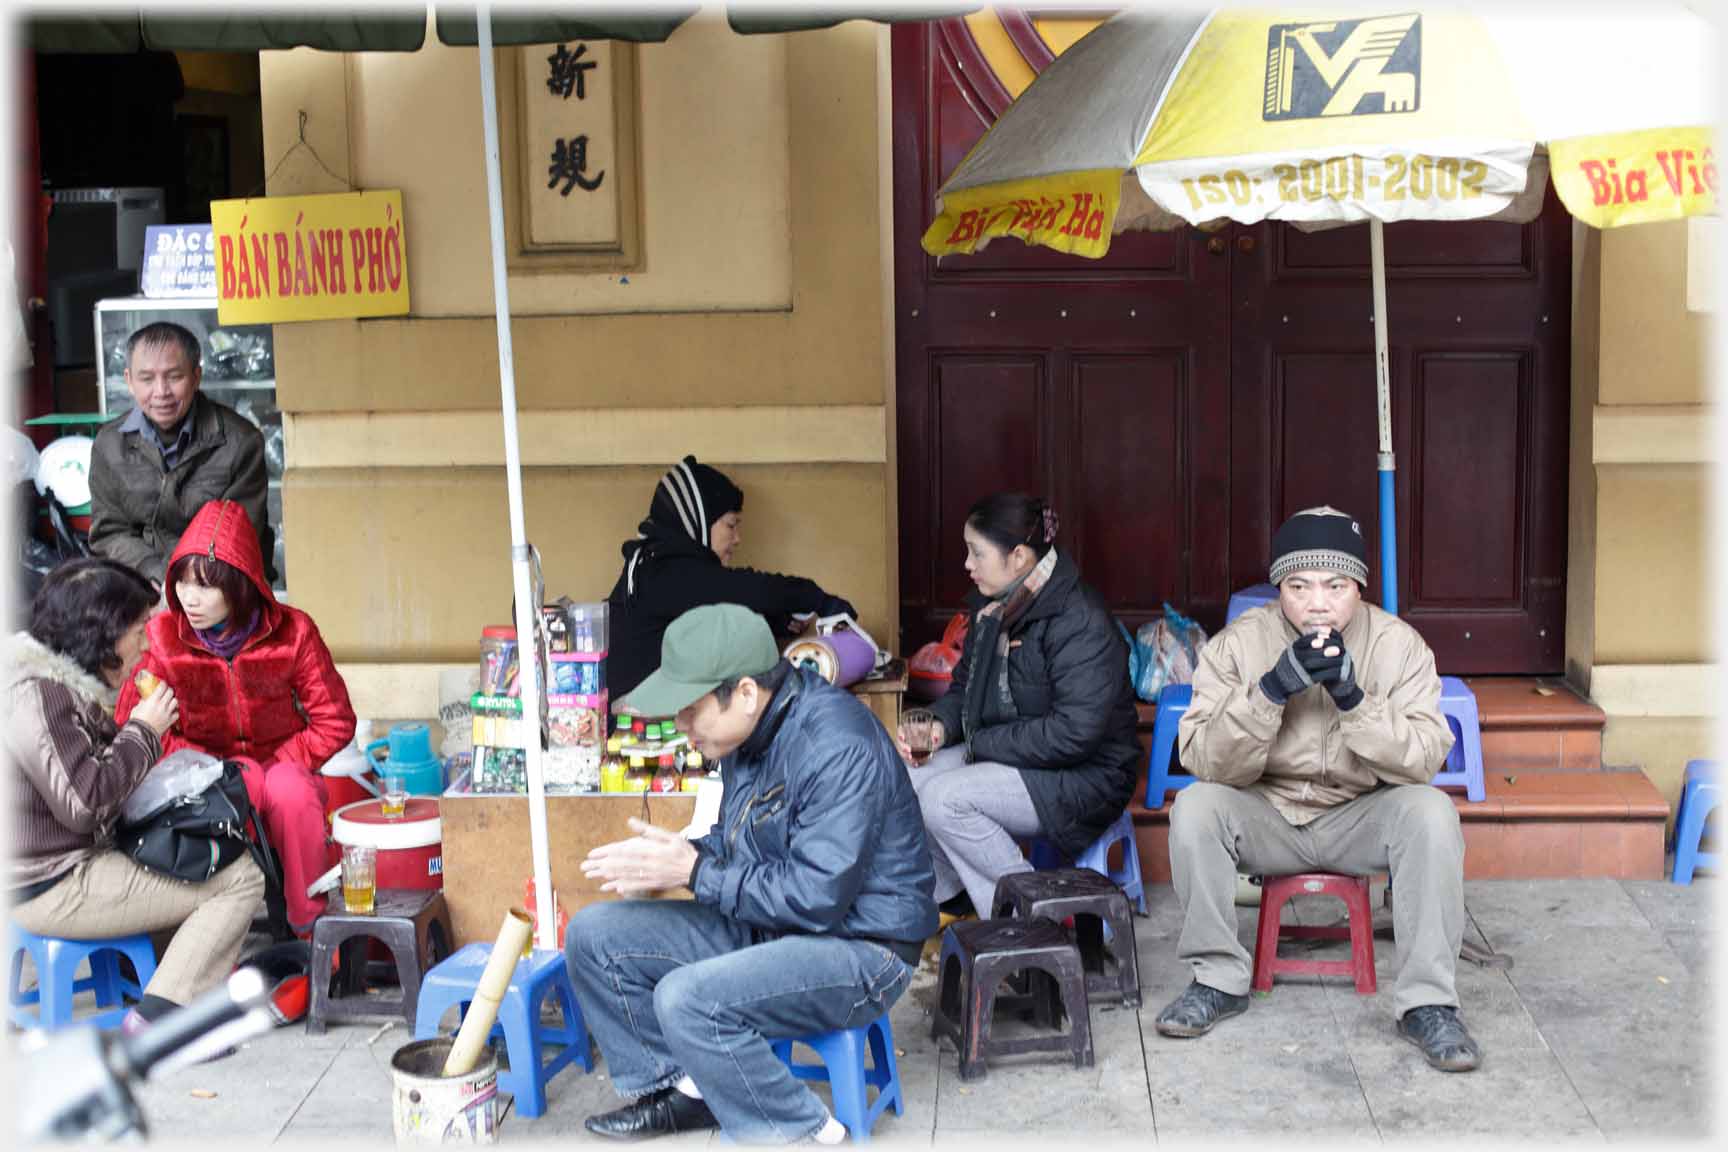 Group of people on low stools in winter clothes by woman pouring tea.